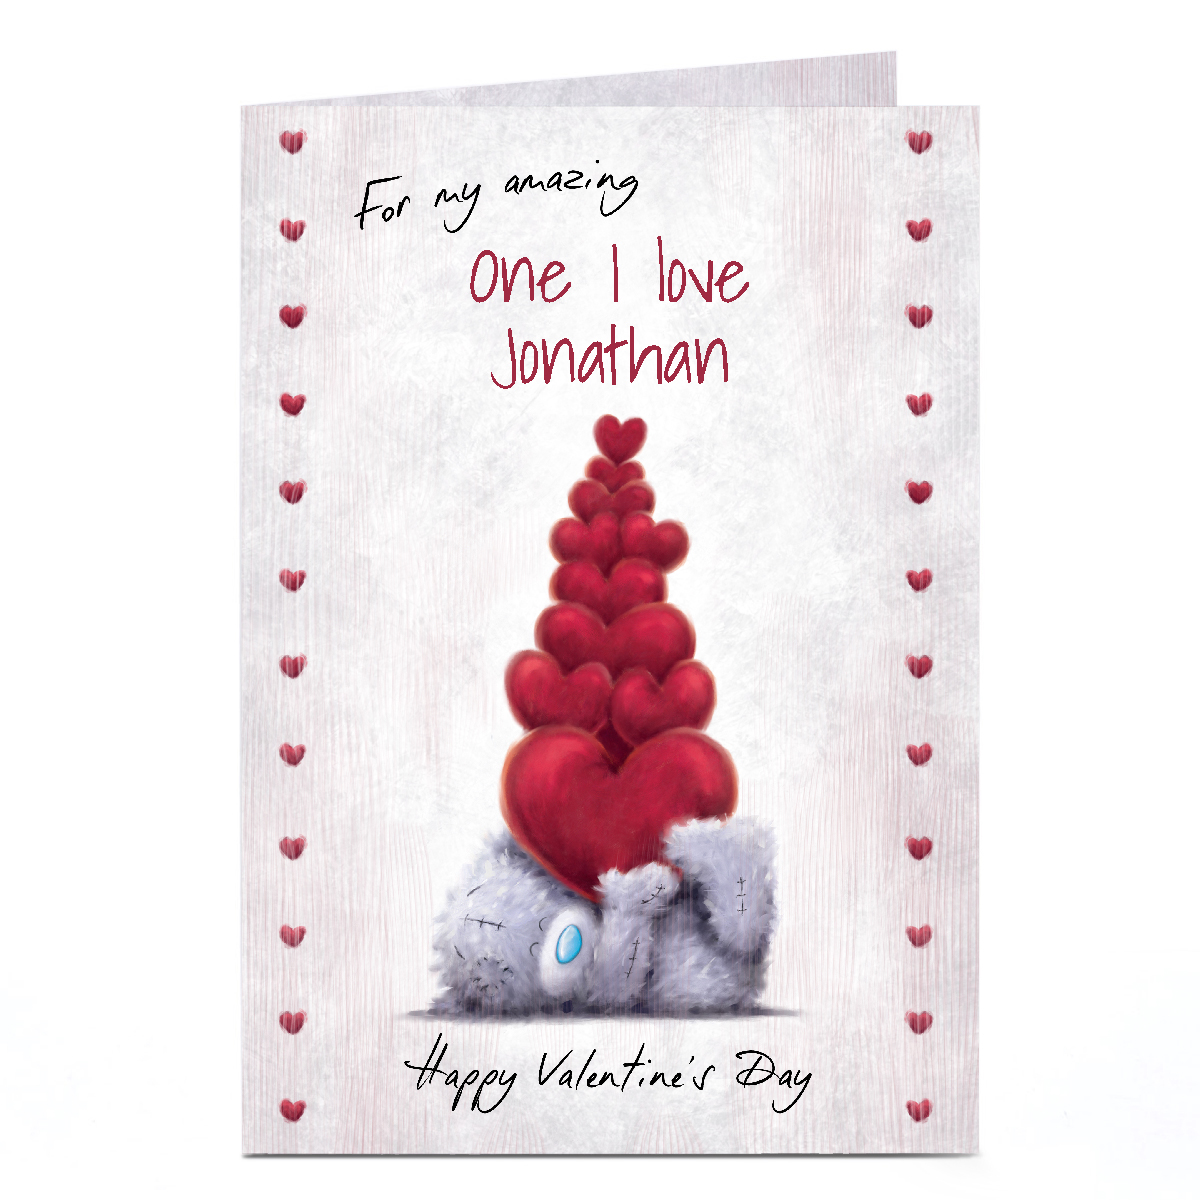 Personalised Tatty Teddy Valentine's Day Card - For My Amazing, One I Love